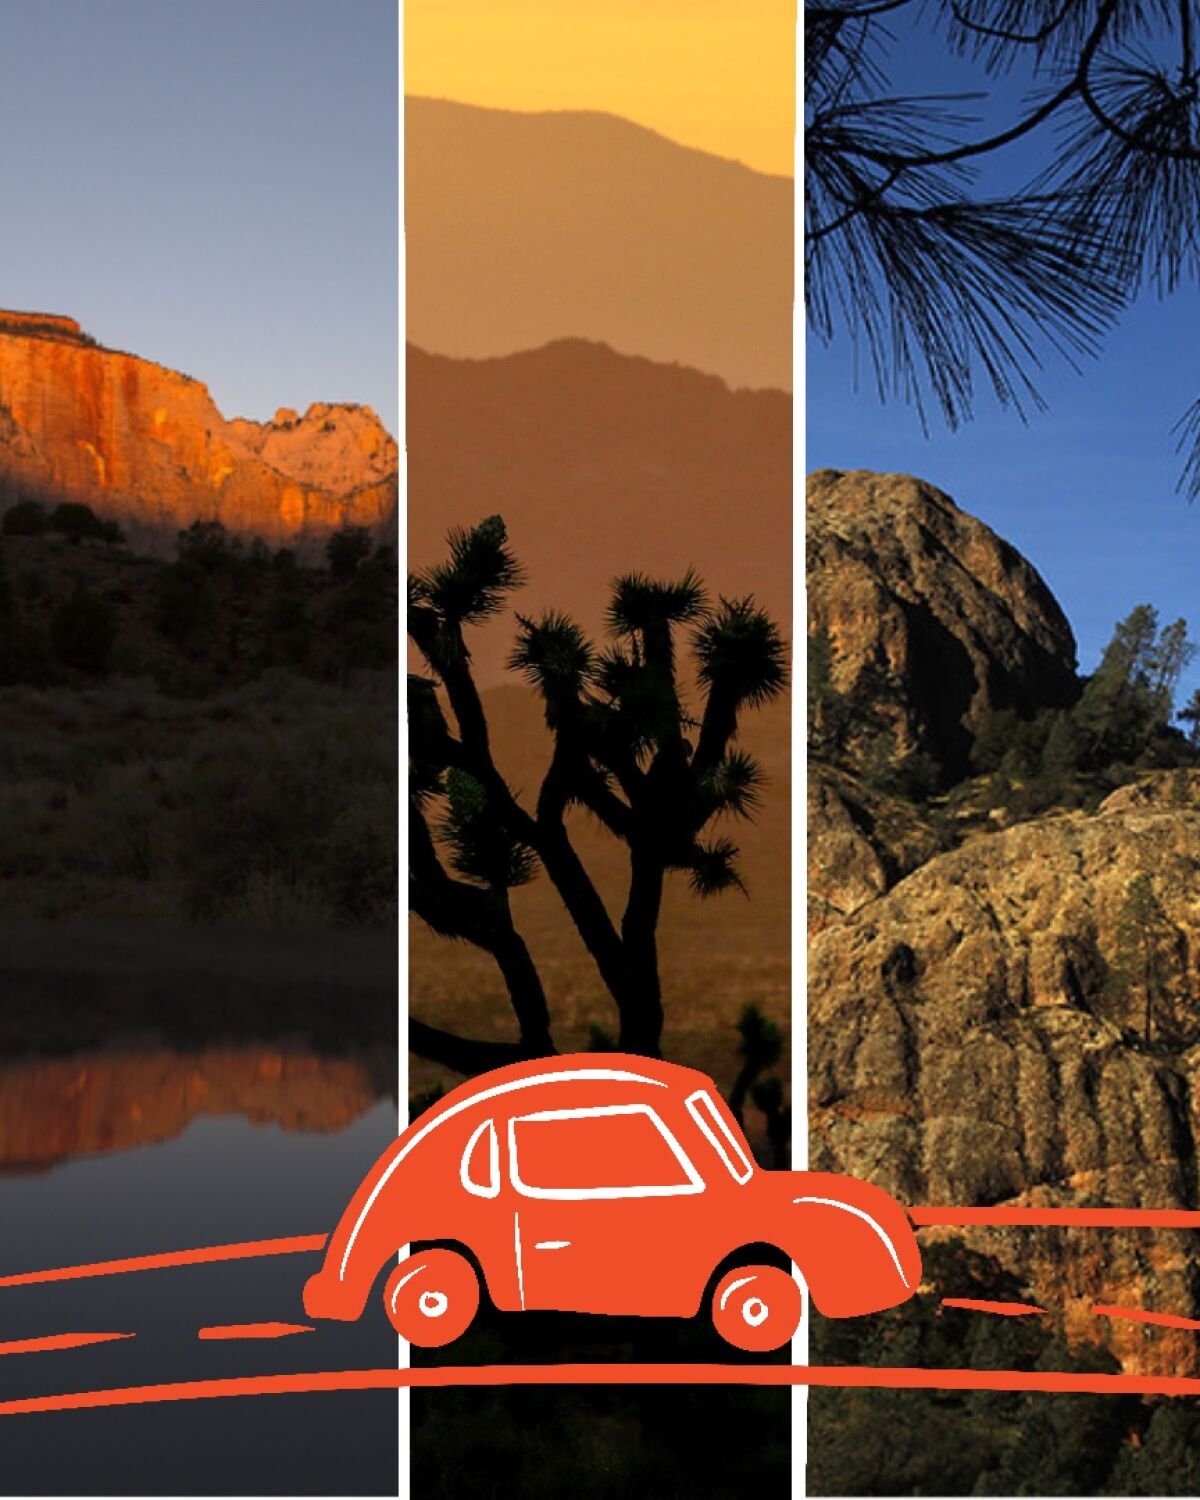 Joshua Tree, Zion and Pinnacles each offer unique national park experiences for travelers